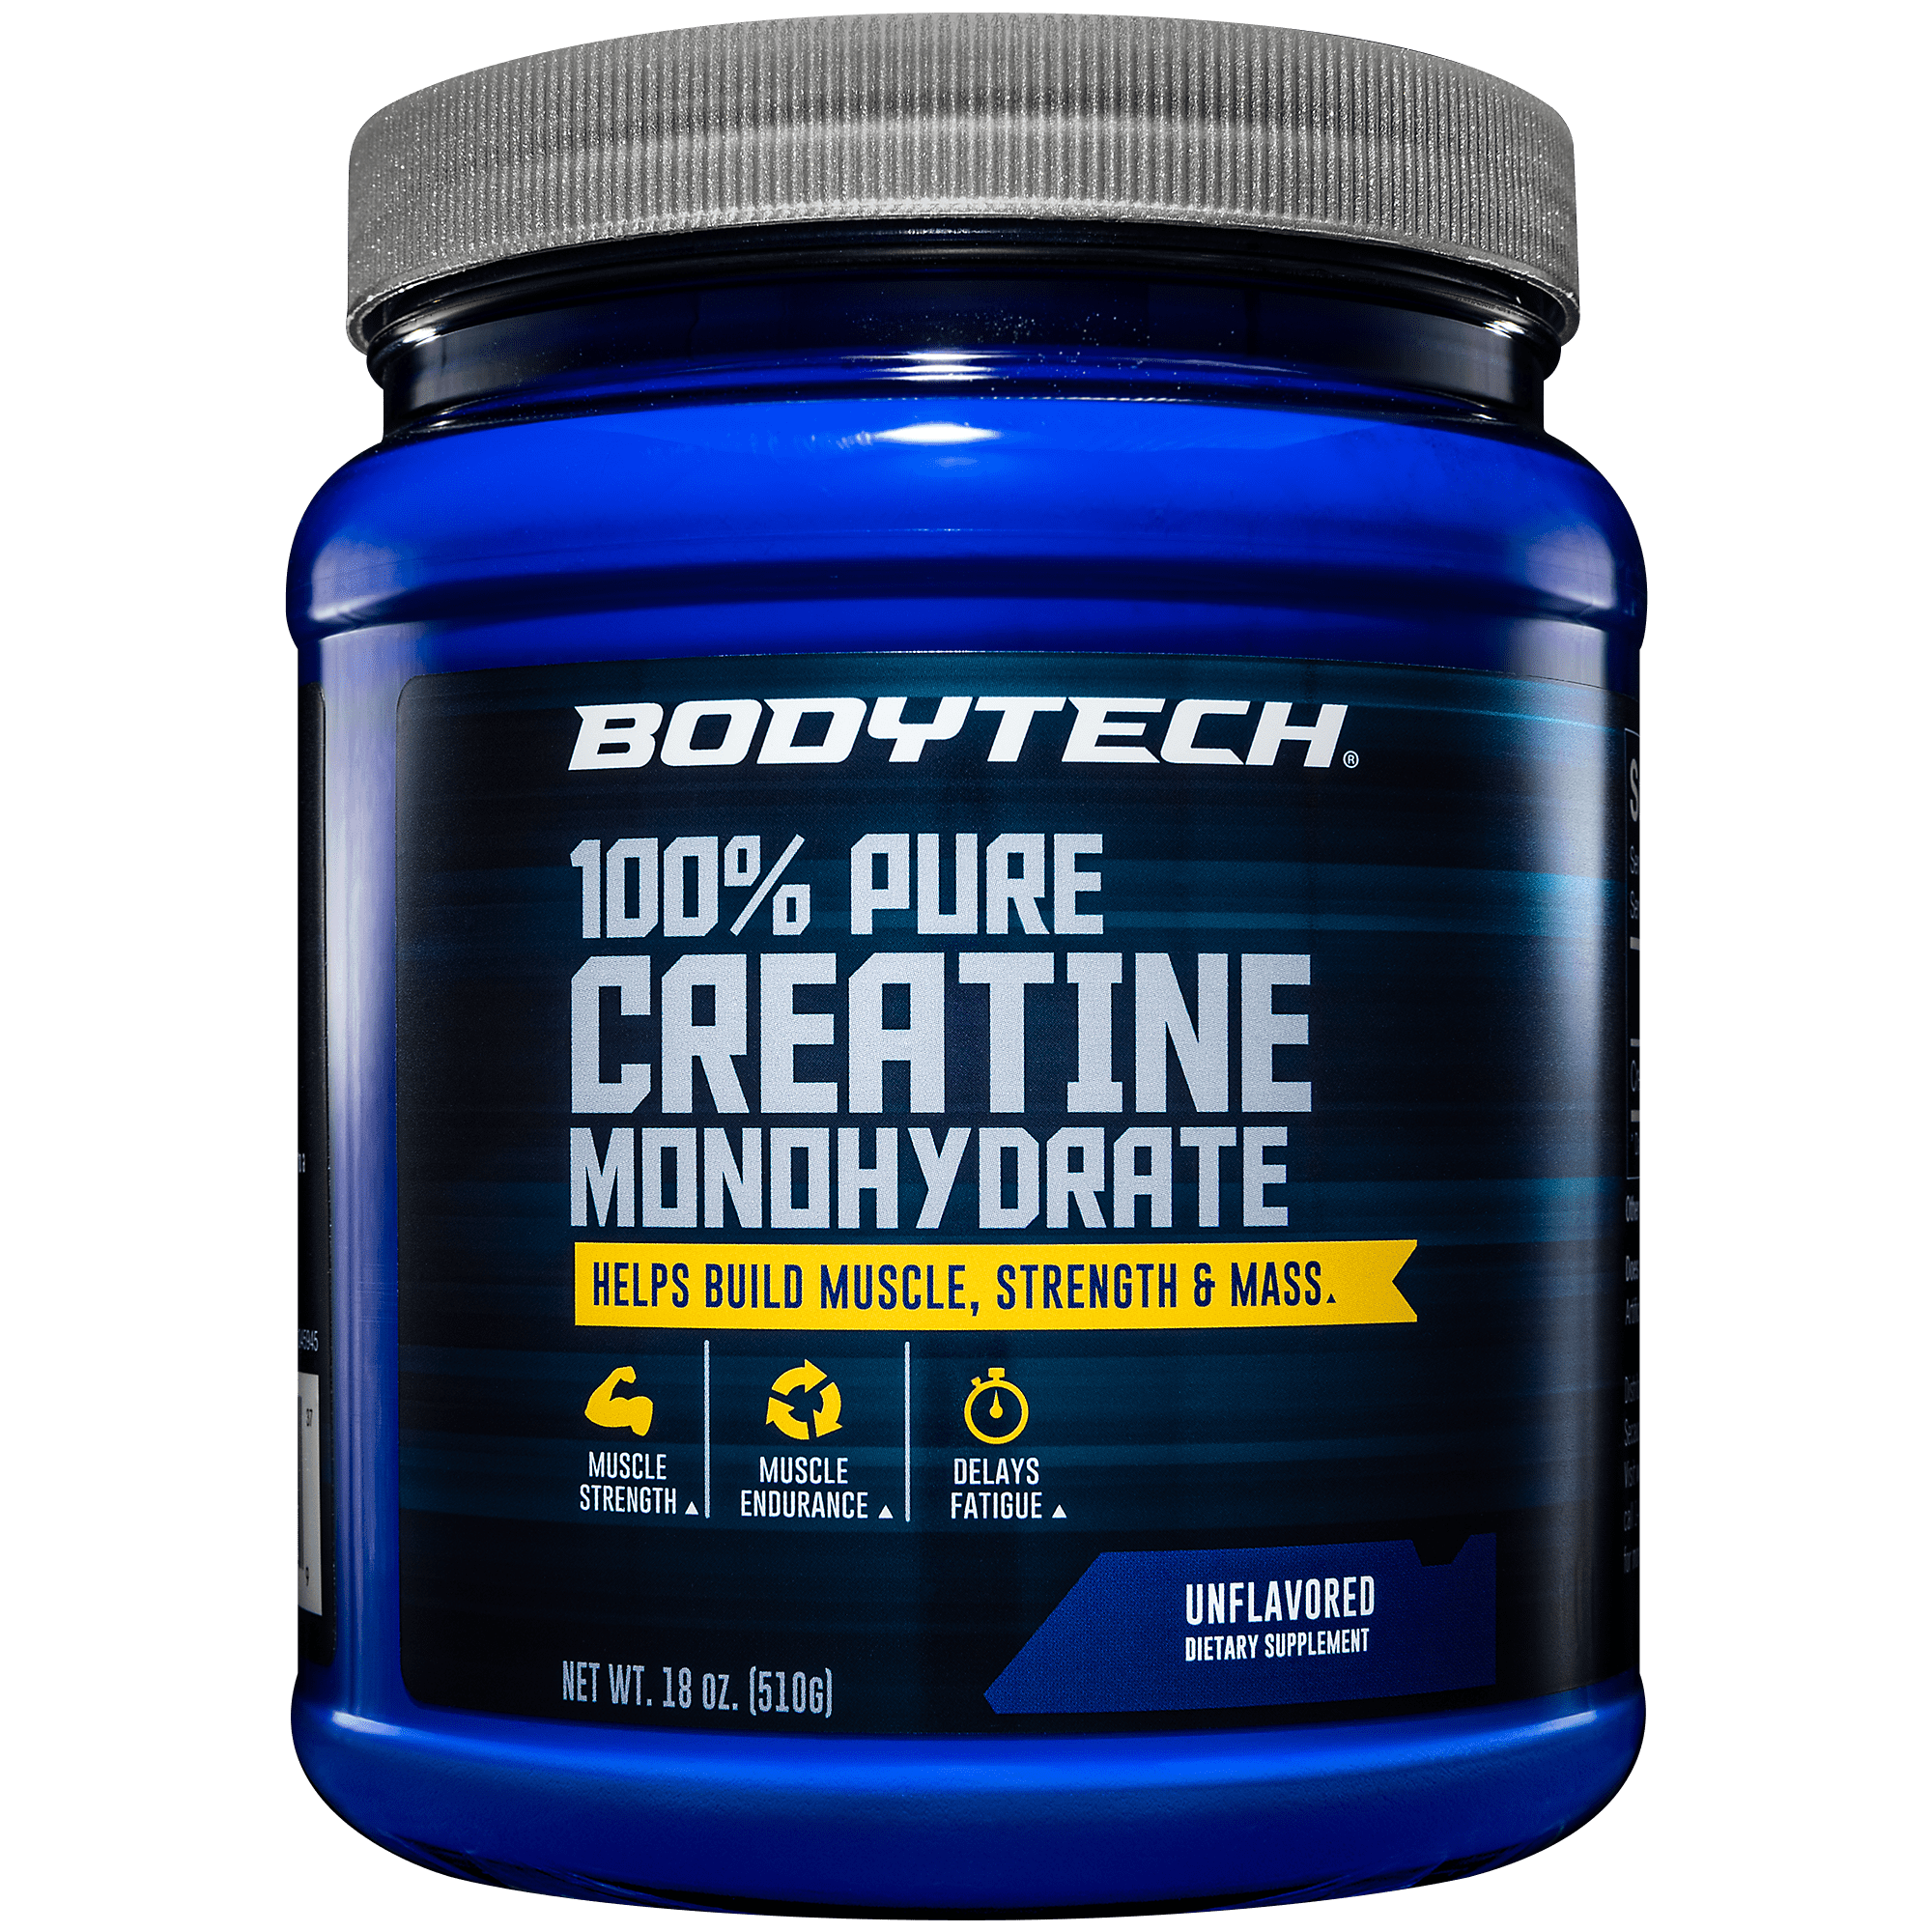 BodyTech 100 Creatine Monohydrate Unflavored 5 GM/serving Supports Muscle Strength Mass (18 Ounce Powder) - Walmart.com